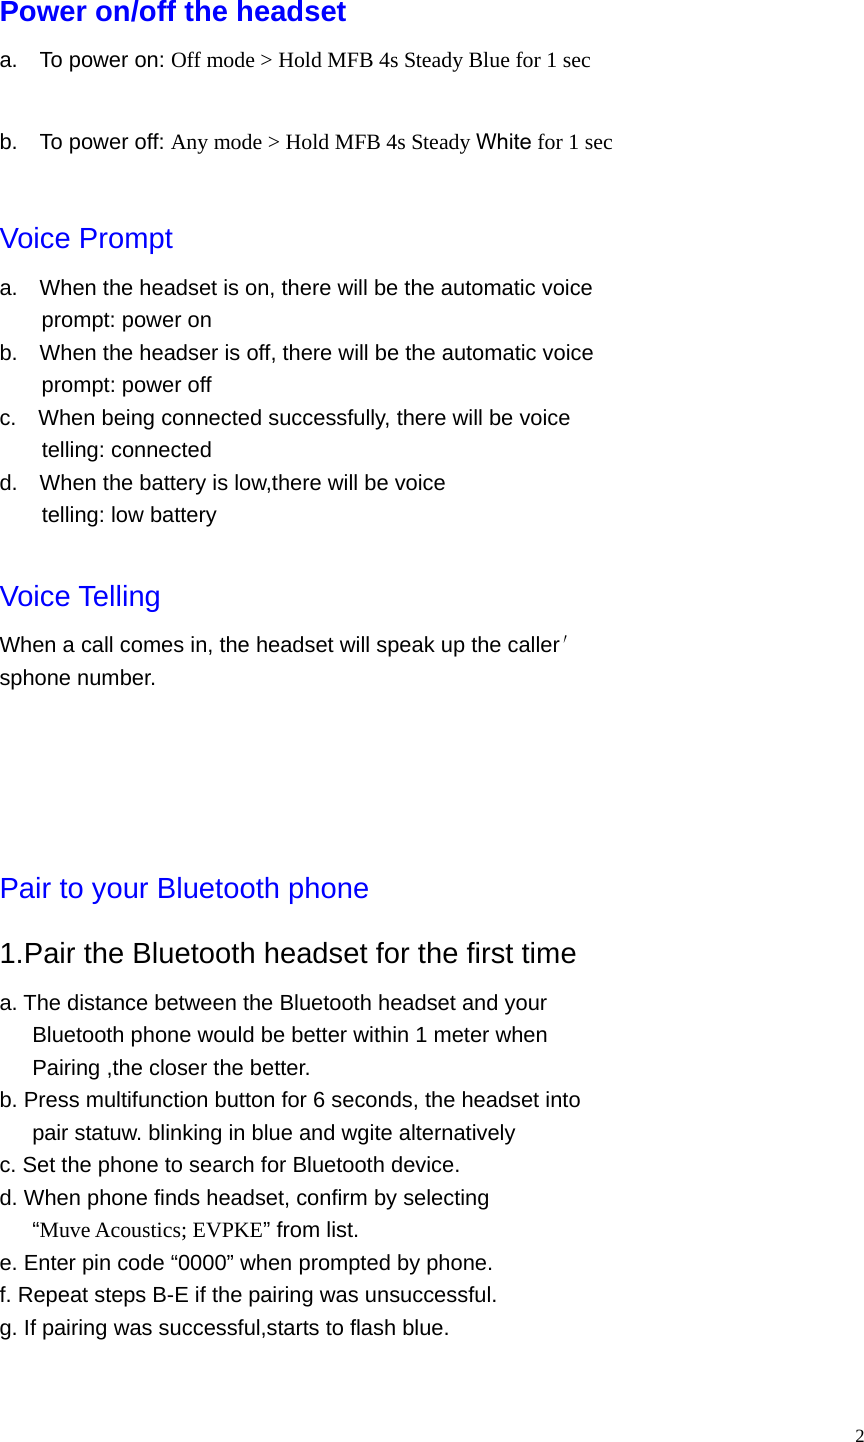   2 Power on/off the headset a.    To power on: Off mode &gt; Hold MFB 4s Steady Blue for 1 sec  b.    To power off: Any mode &gt; Hold MFB 4s Steady White for 1 sec  Voice Prompt a.    When the headset is on, there will be the automatic voice prompt: power on b.    When the headser is off, there will be the automatic voice prompt: power off c.    When being connected successfully, there will be voice telling: connected d.    When the battery is low,there will be voice telling: low battery  Voice Telling When a call comes in, the headset will speak up the caller′ sphone number.      Pair to your Bluetooth phone 1.Pair the Bluetooth headset for the first time a. The distance between the Bluetooth headset and your         Bluetooth phone would be better within 1 meter when Pairing ,the closer the better. b. Press multifunction button for 6 seconds, the headset into       pair statuw. blinking in blue and wgite alternatively c. Set the phone to search for Bluetooth device. d. When phone finds headset, confirm by selecting    “Muve Acoustics; EVPKE” from list. e. Enter pin code “0000” when prompted by phone. f. Repeat steps B-E if the pairing was unsuccessful. g. If pairing was successful,starts to flash blue.  